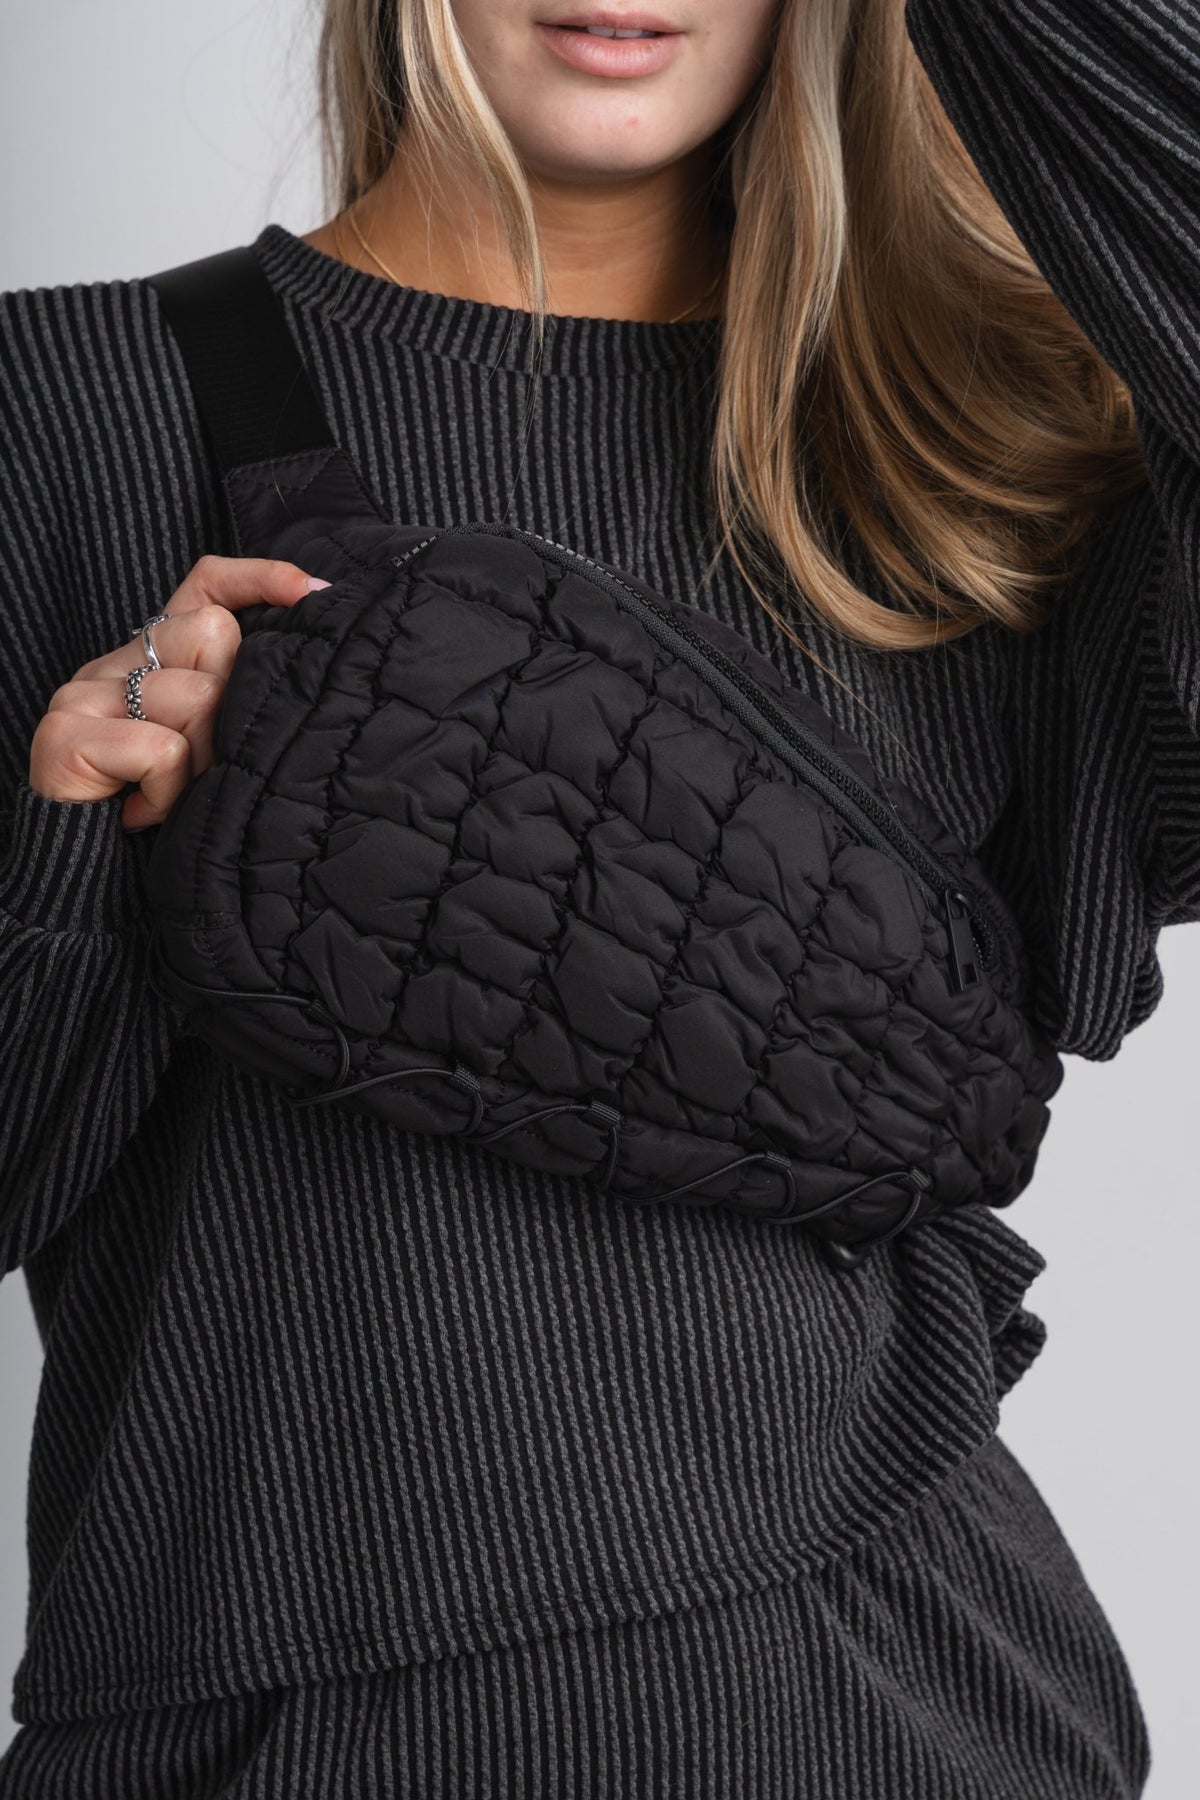 Quilted sling bag black - Trendy Bags at Lush Fashion Lounge Boutique in Oklahoma City